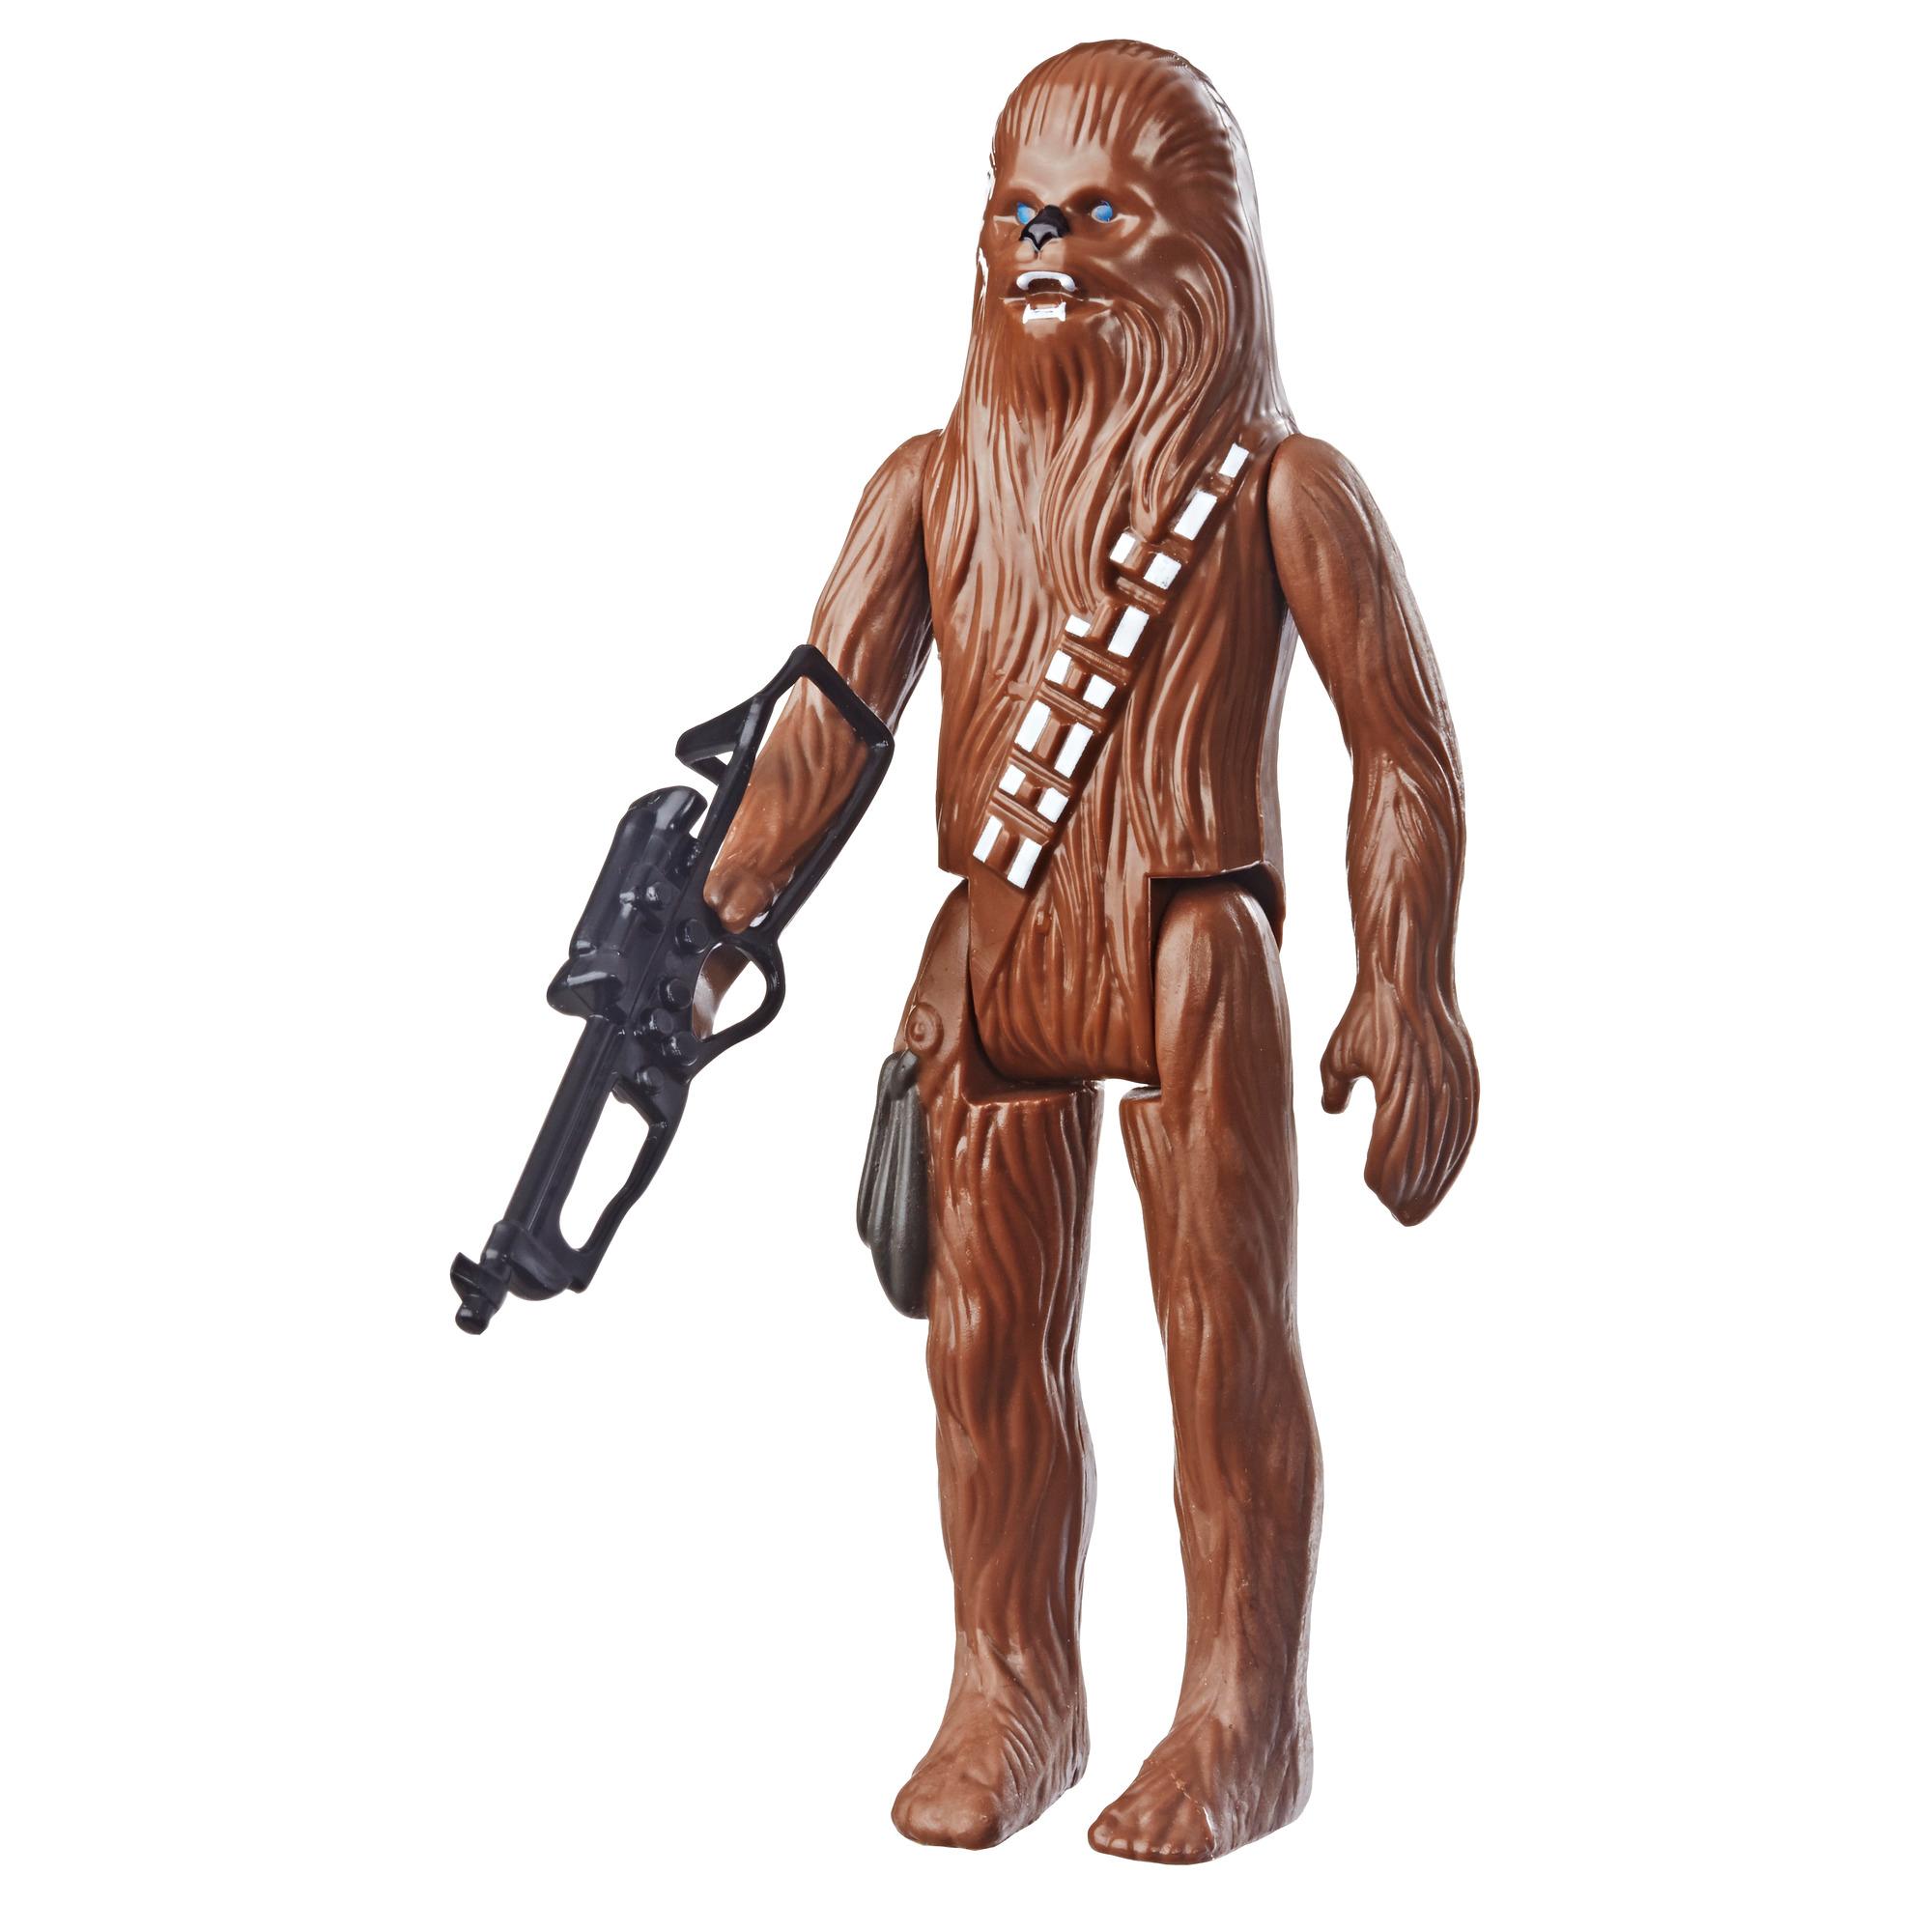 STAR WARS RETRO COLLECTION CHEWBACCA TARGET EXCLUSIVE LOOSE COMPLETE